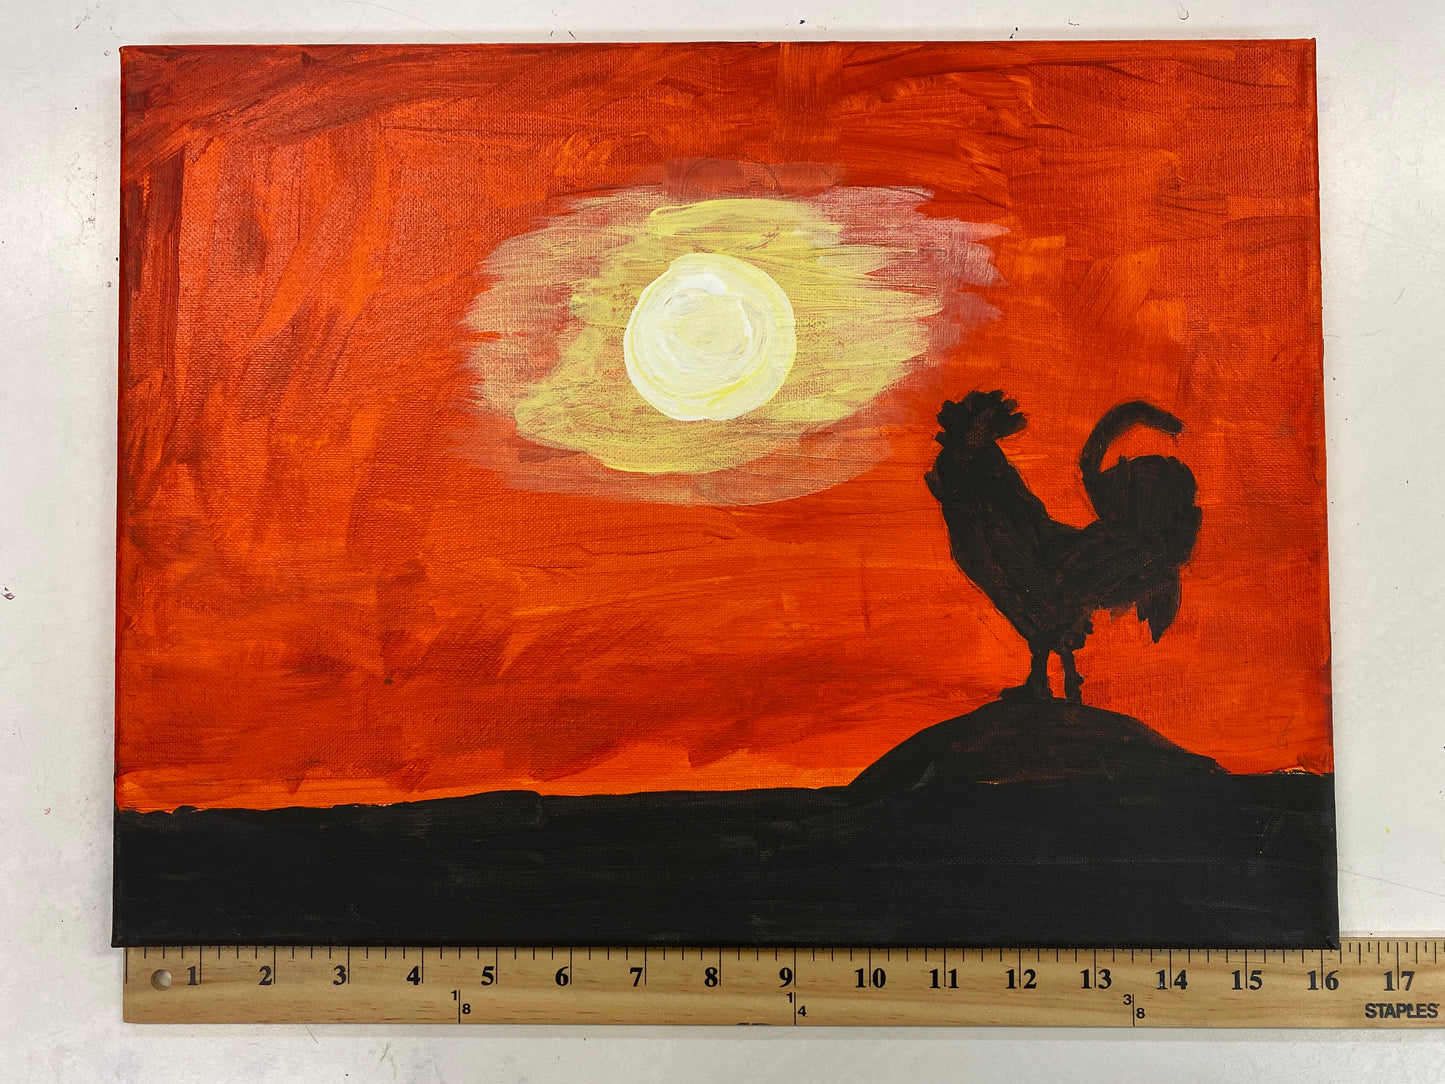 Acrylic Paint on Stretched Canvas, 16 x 12 Original Fine Art, Rooster made by Jennifer Evje